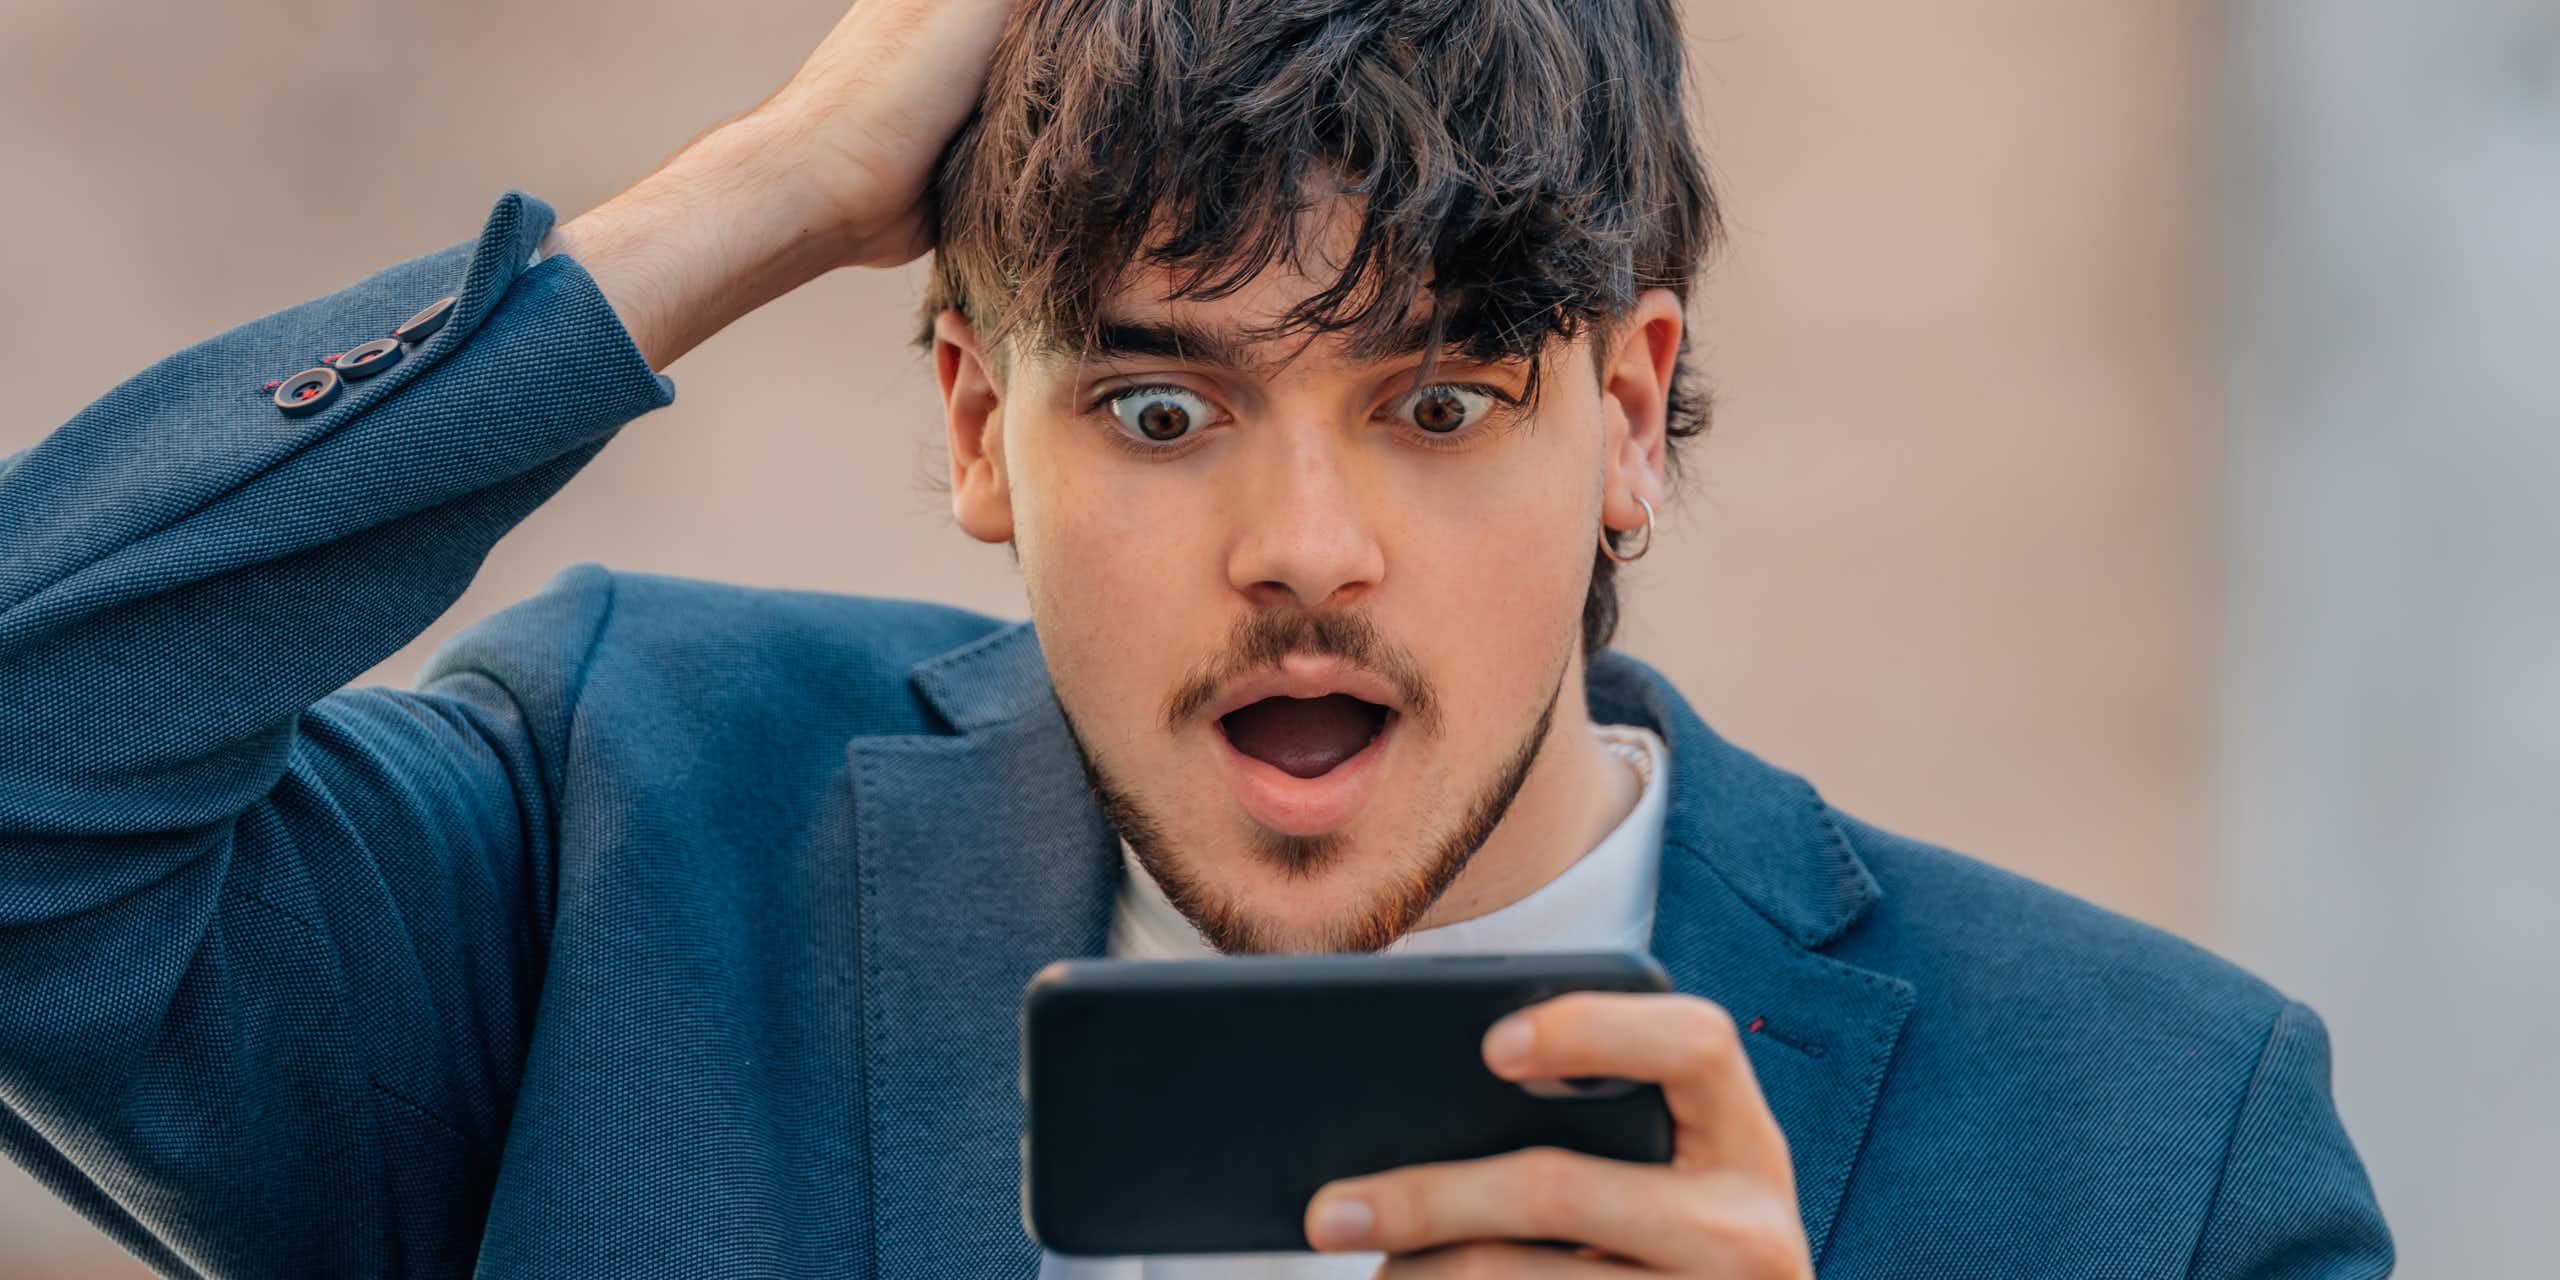 A young man places his right hand on his head while looking excitedly at his cellphone, which he is holding in his left.